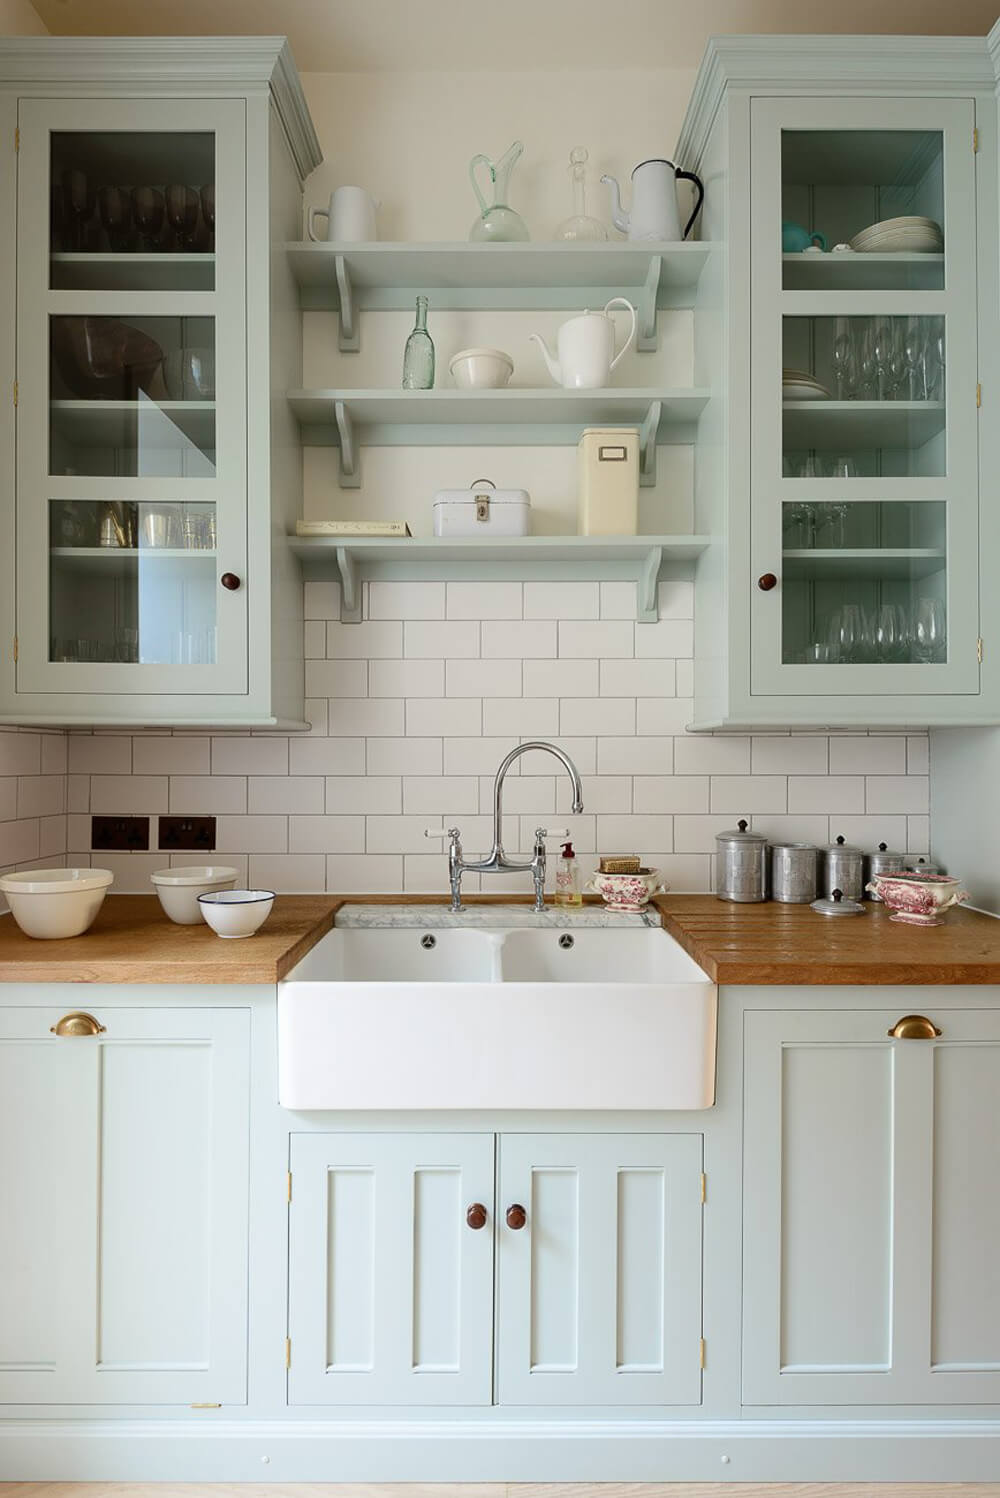 Mint green cabinets in the kitchen with a white backsplash and a wooden counter.